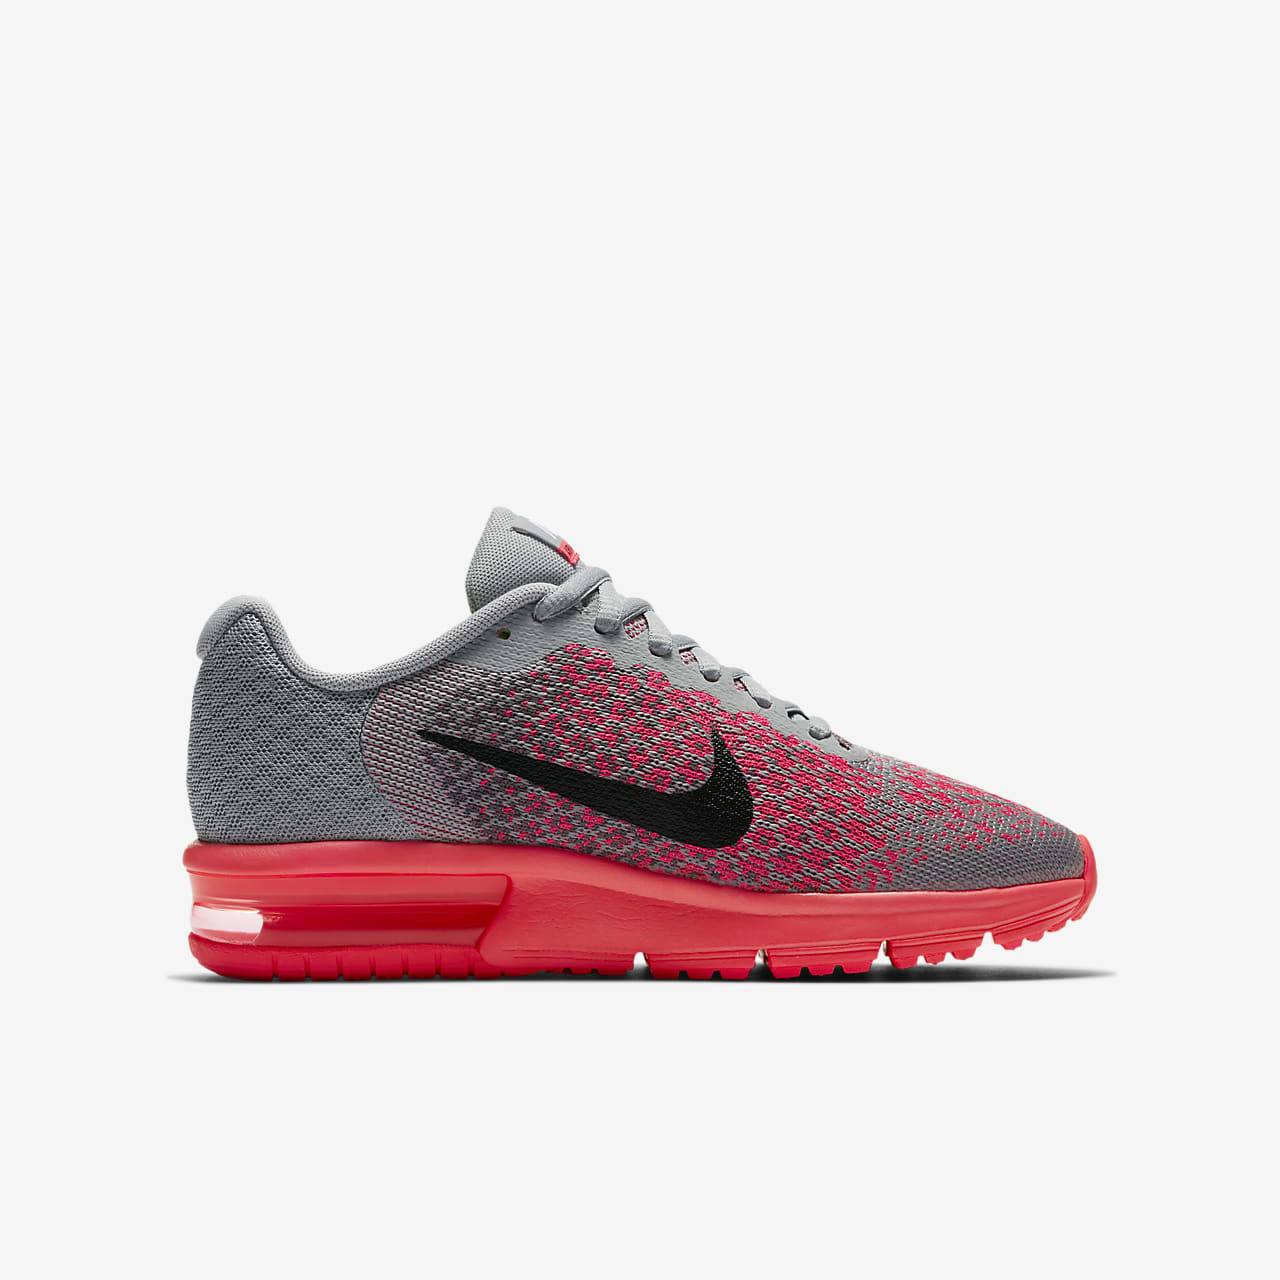 air max sequent 2 red